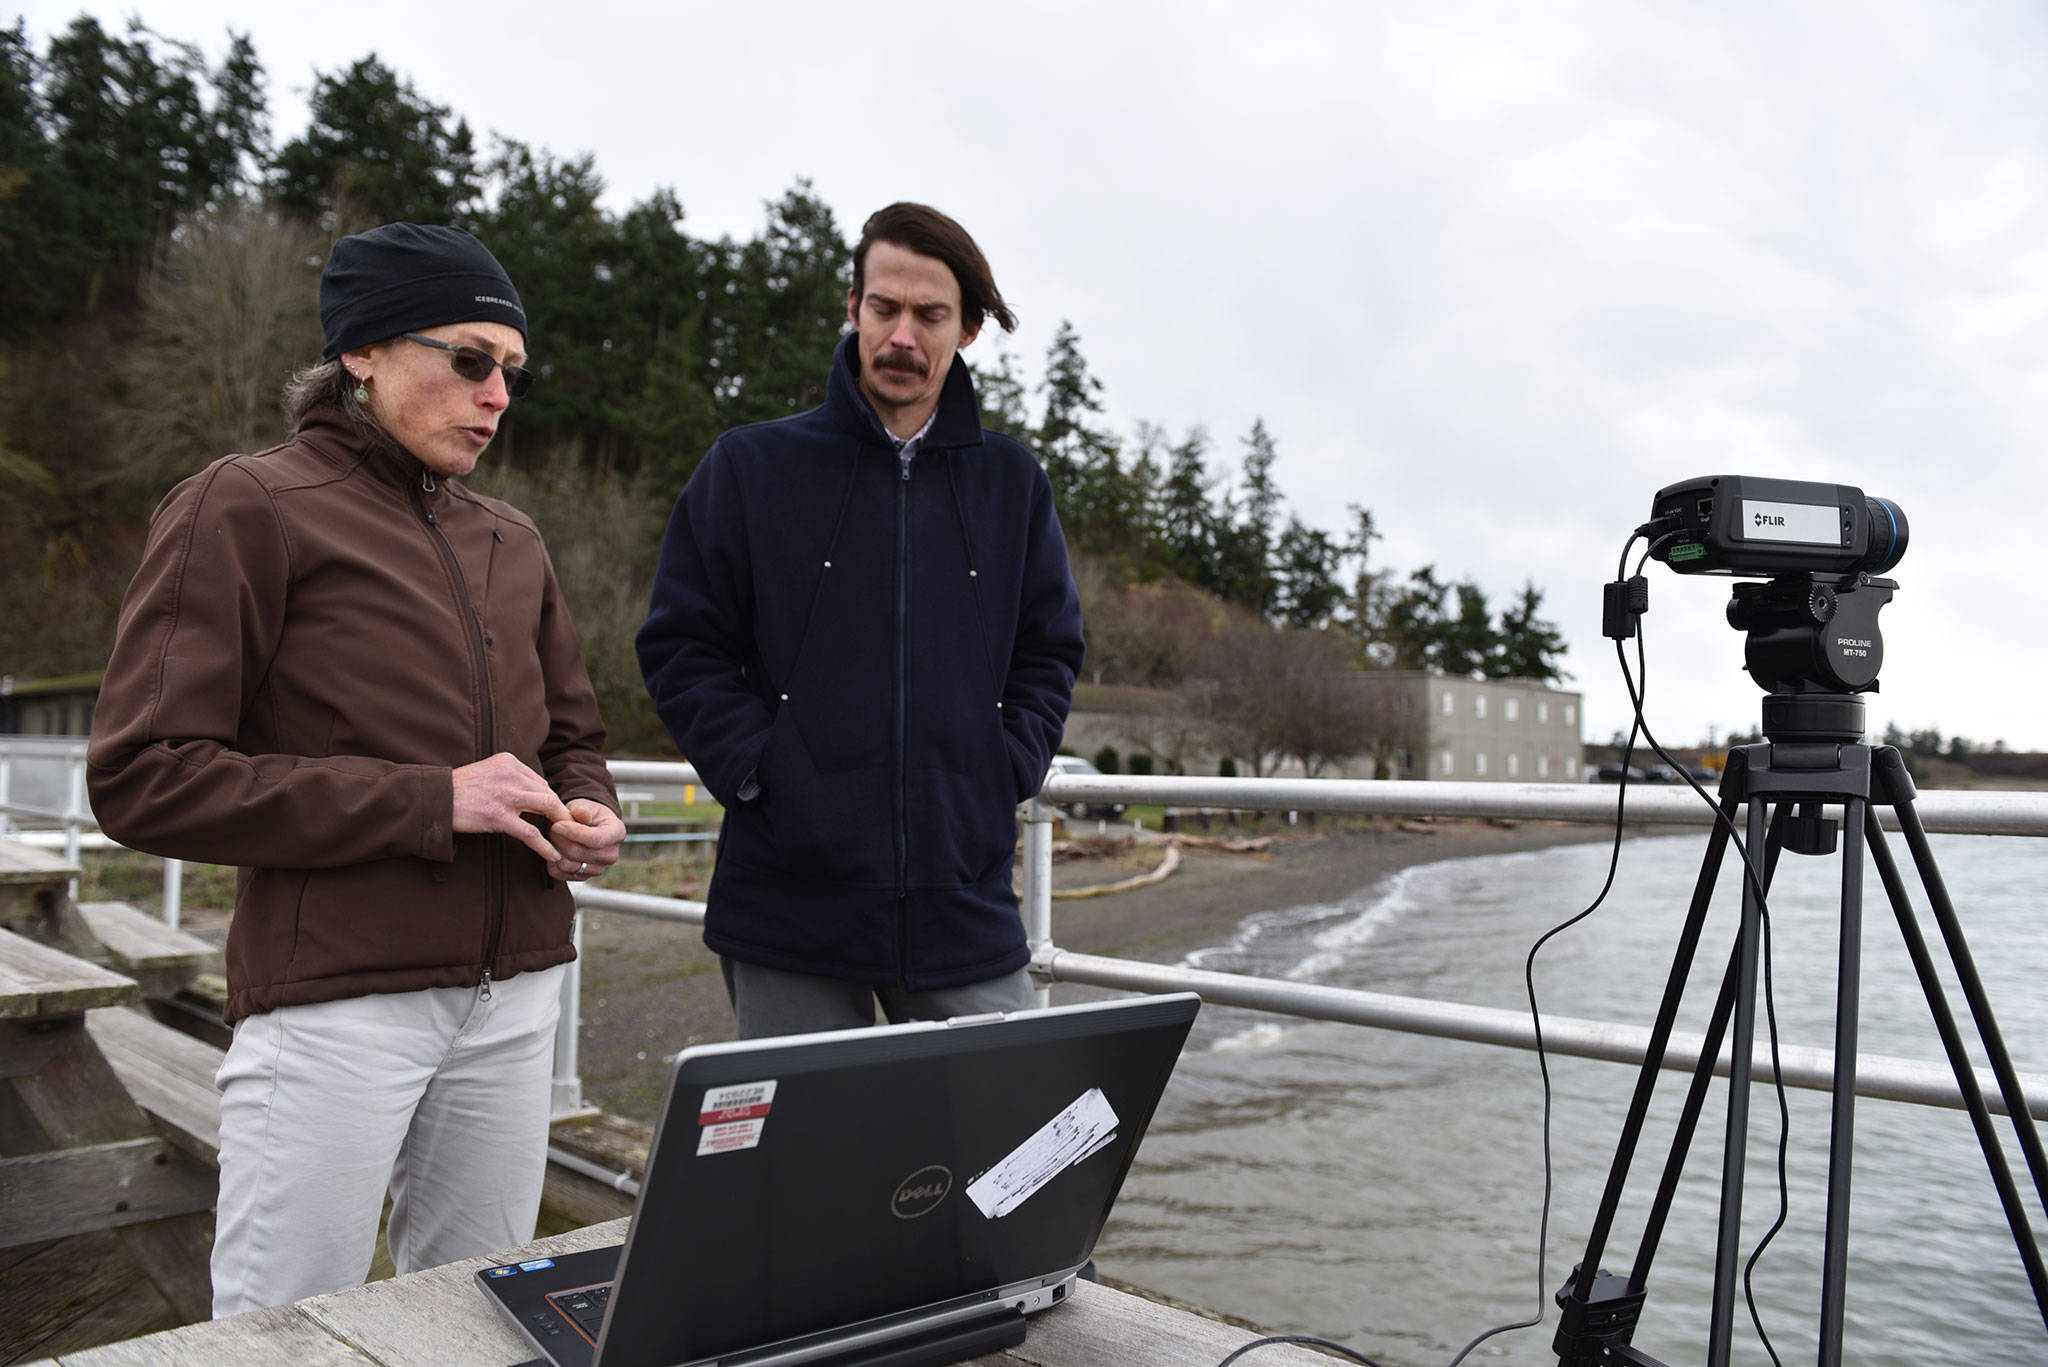 Engineers Shari Matzner and Garrett Staines with Pacific Northwest National Laboratory’s Marine Sciences Laboratory discuss their development of software that will analyze thermal video to help birds and bats co-exist with offshore wind farms. (Eric Francavilla/Pacific Northwest National Laboratory)